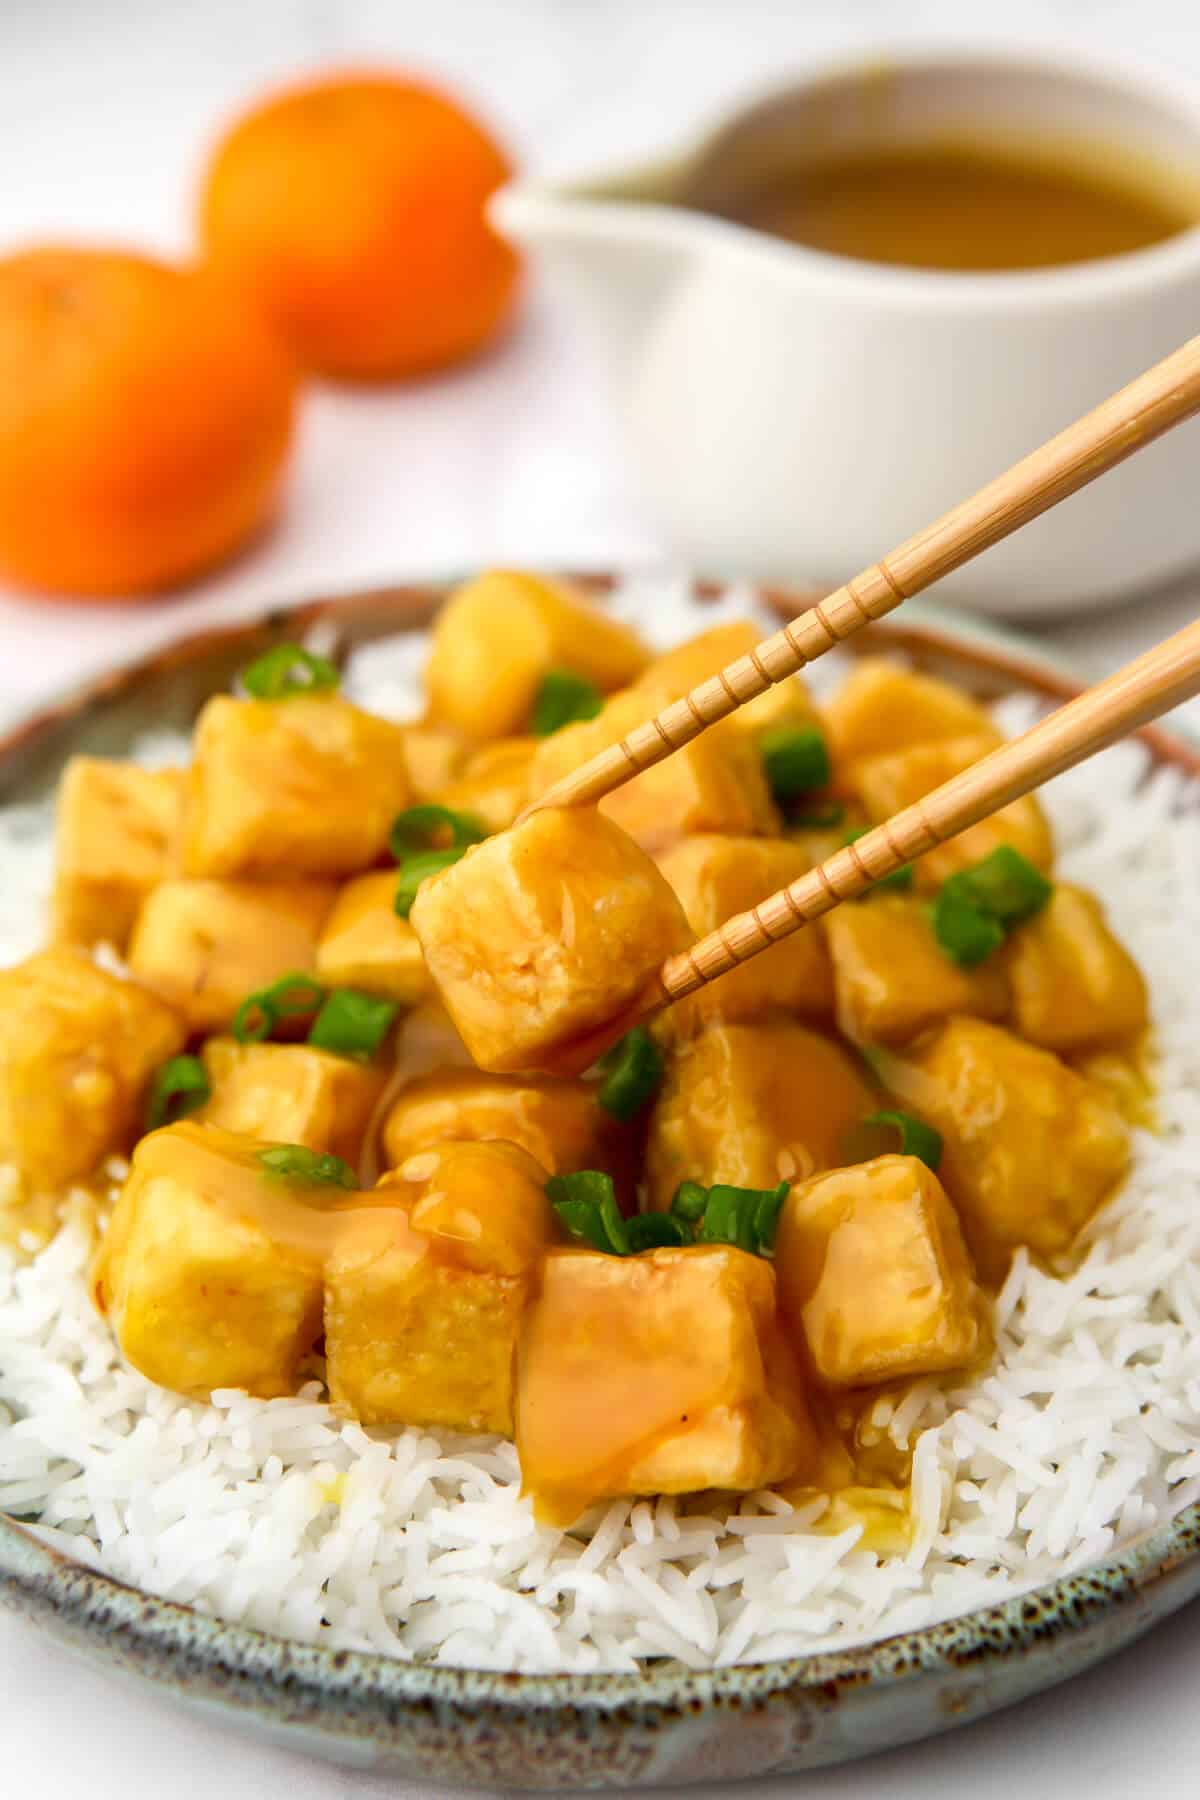 Crispy orange tofu on a bed of white rice with a container of orange sauce and 2 oranges behind it.